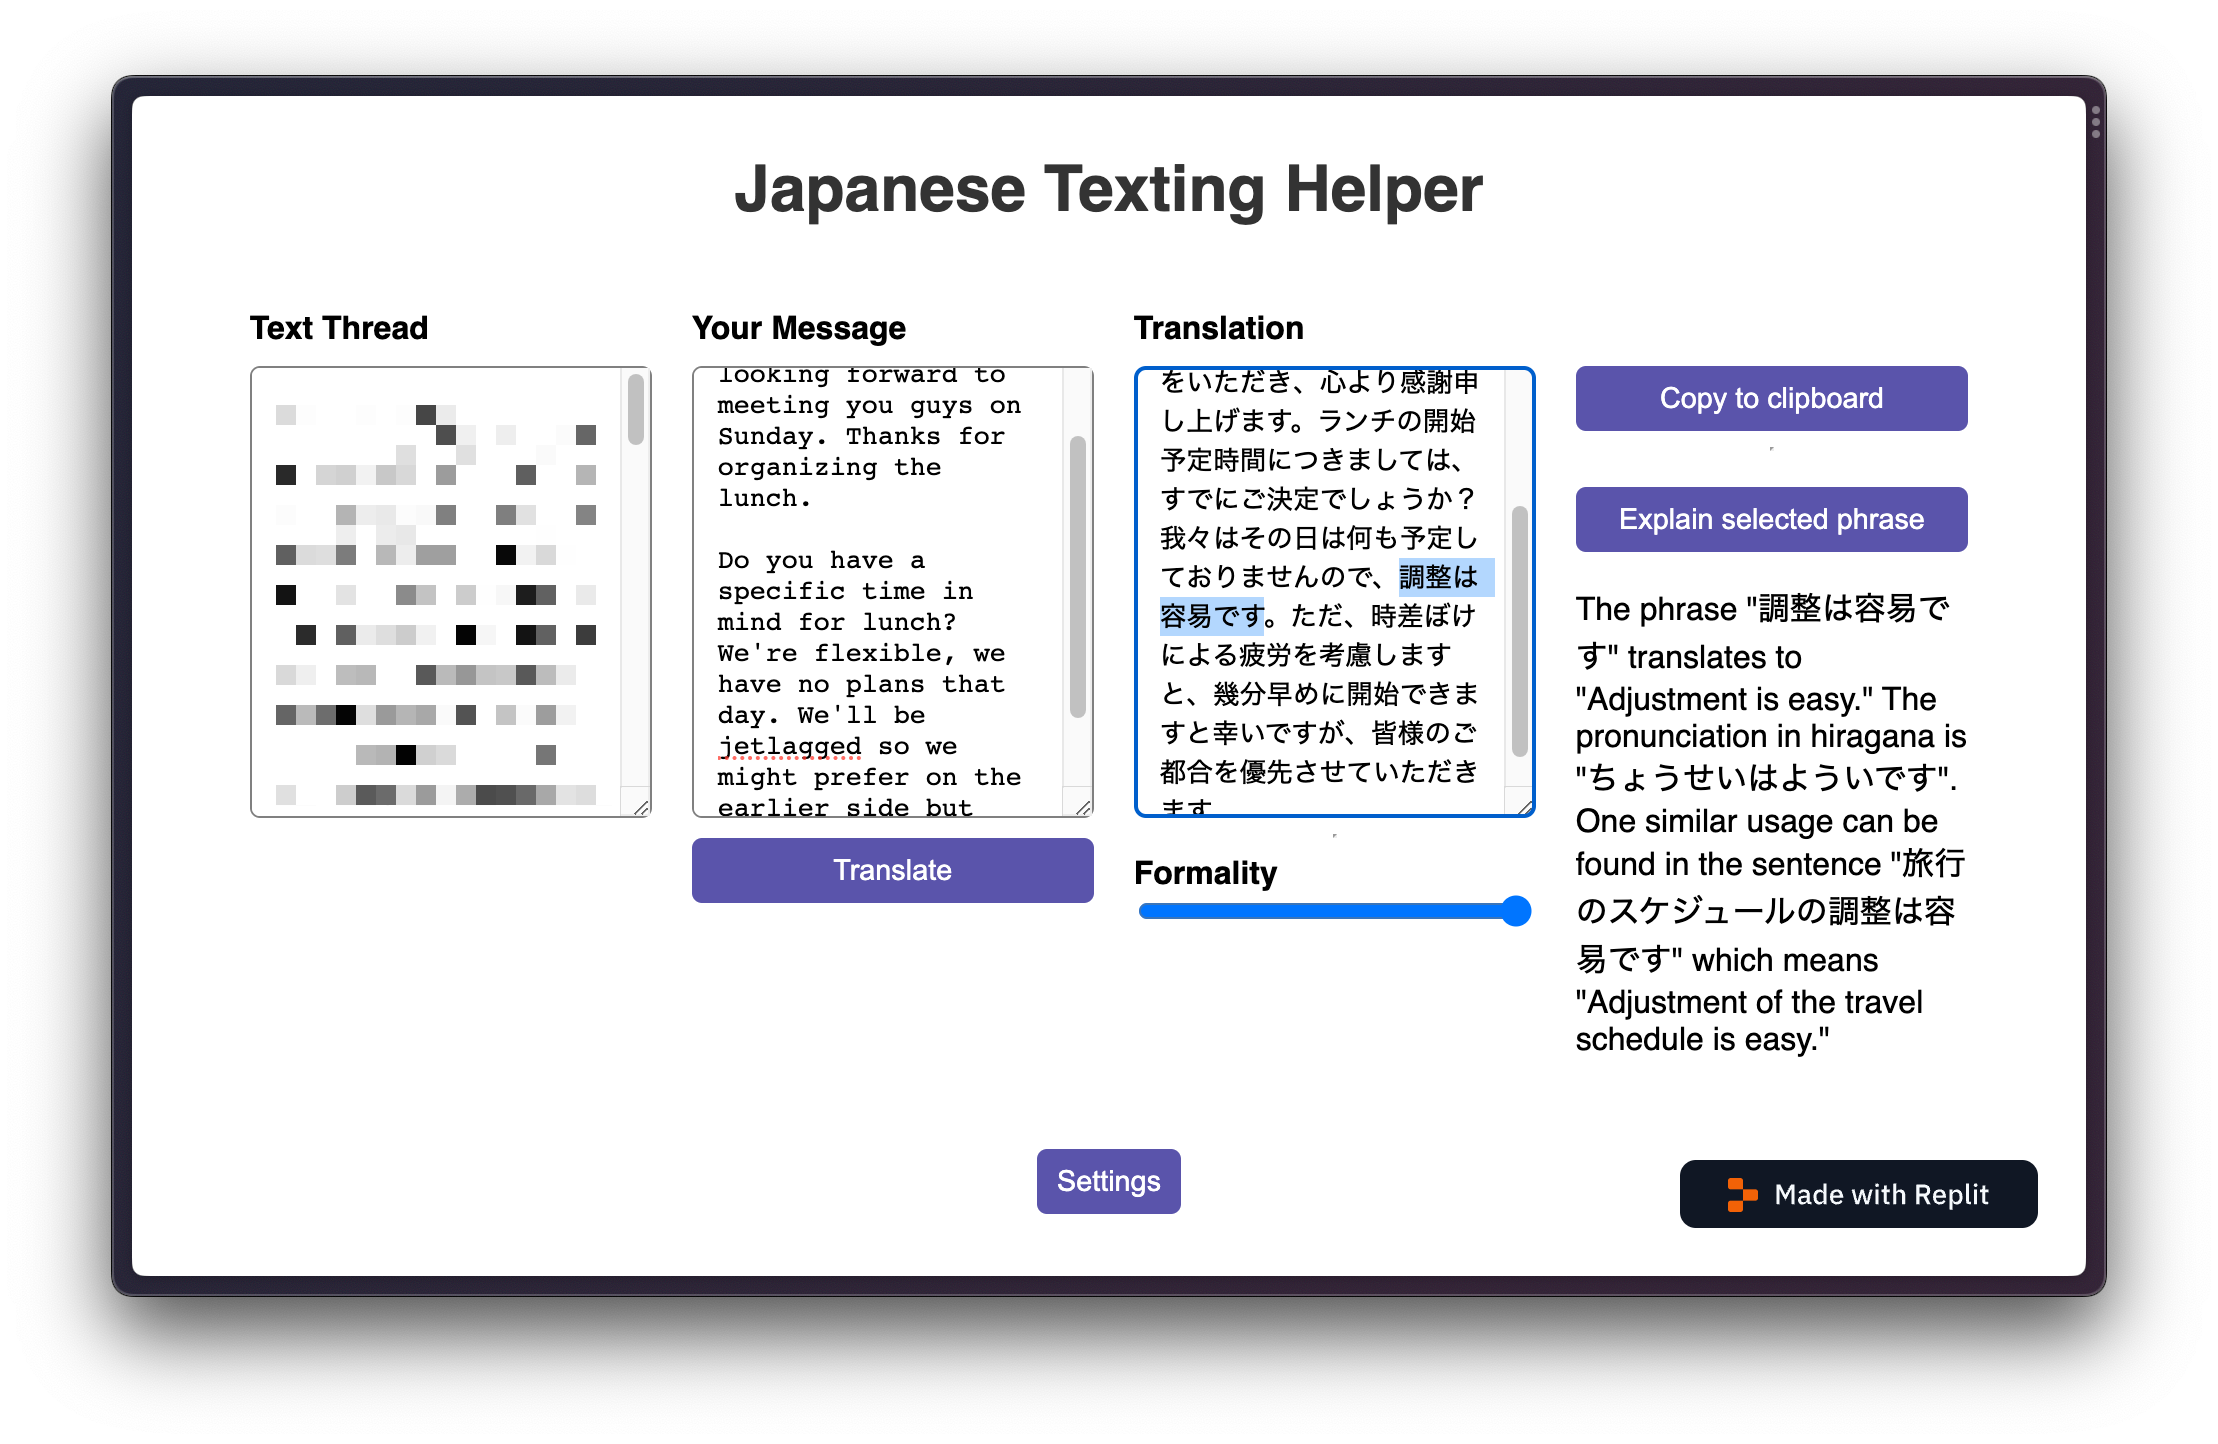 an app with an input for an English message, output for a Japanese translation, and a slider for formality and an explanation of a selected phrase